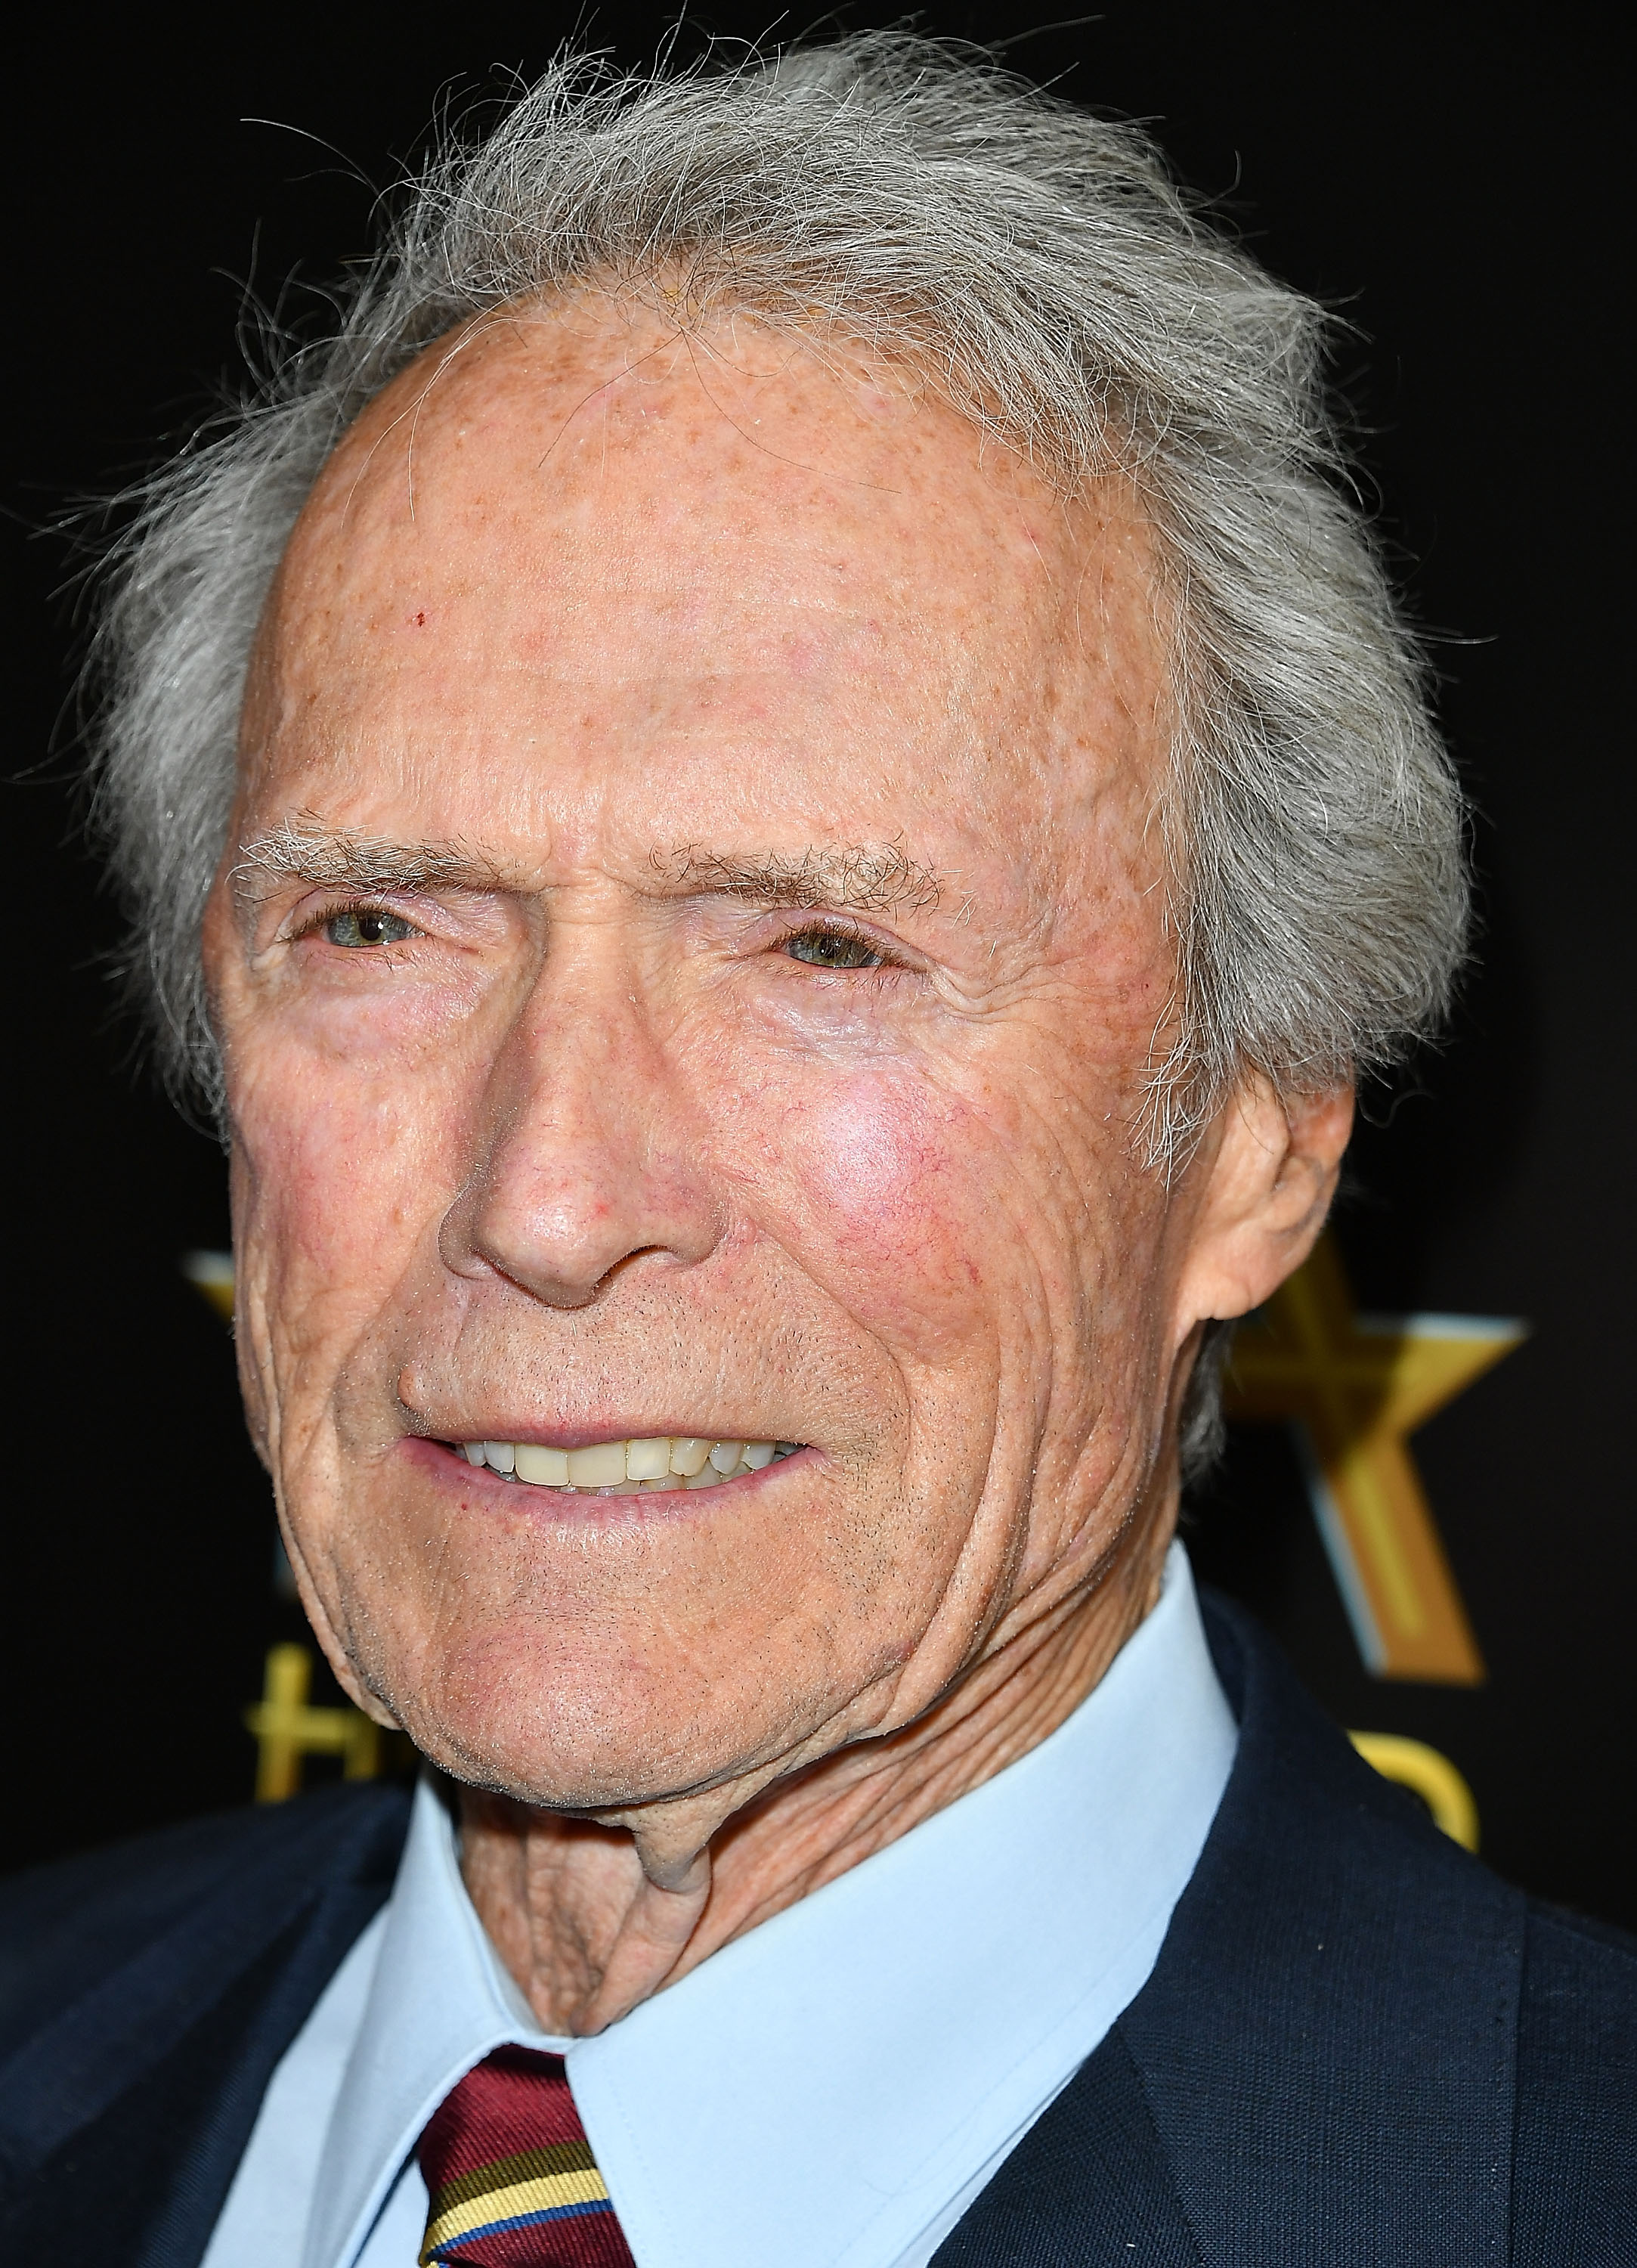 Clint Eastwood posiert bei den 20th Annual Hollywood Film Awards im The Beverly Hilton Hotel in Beverly Hills, Kalifornien, am 6. November 2016. | Quelle: Getty Images